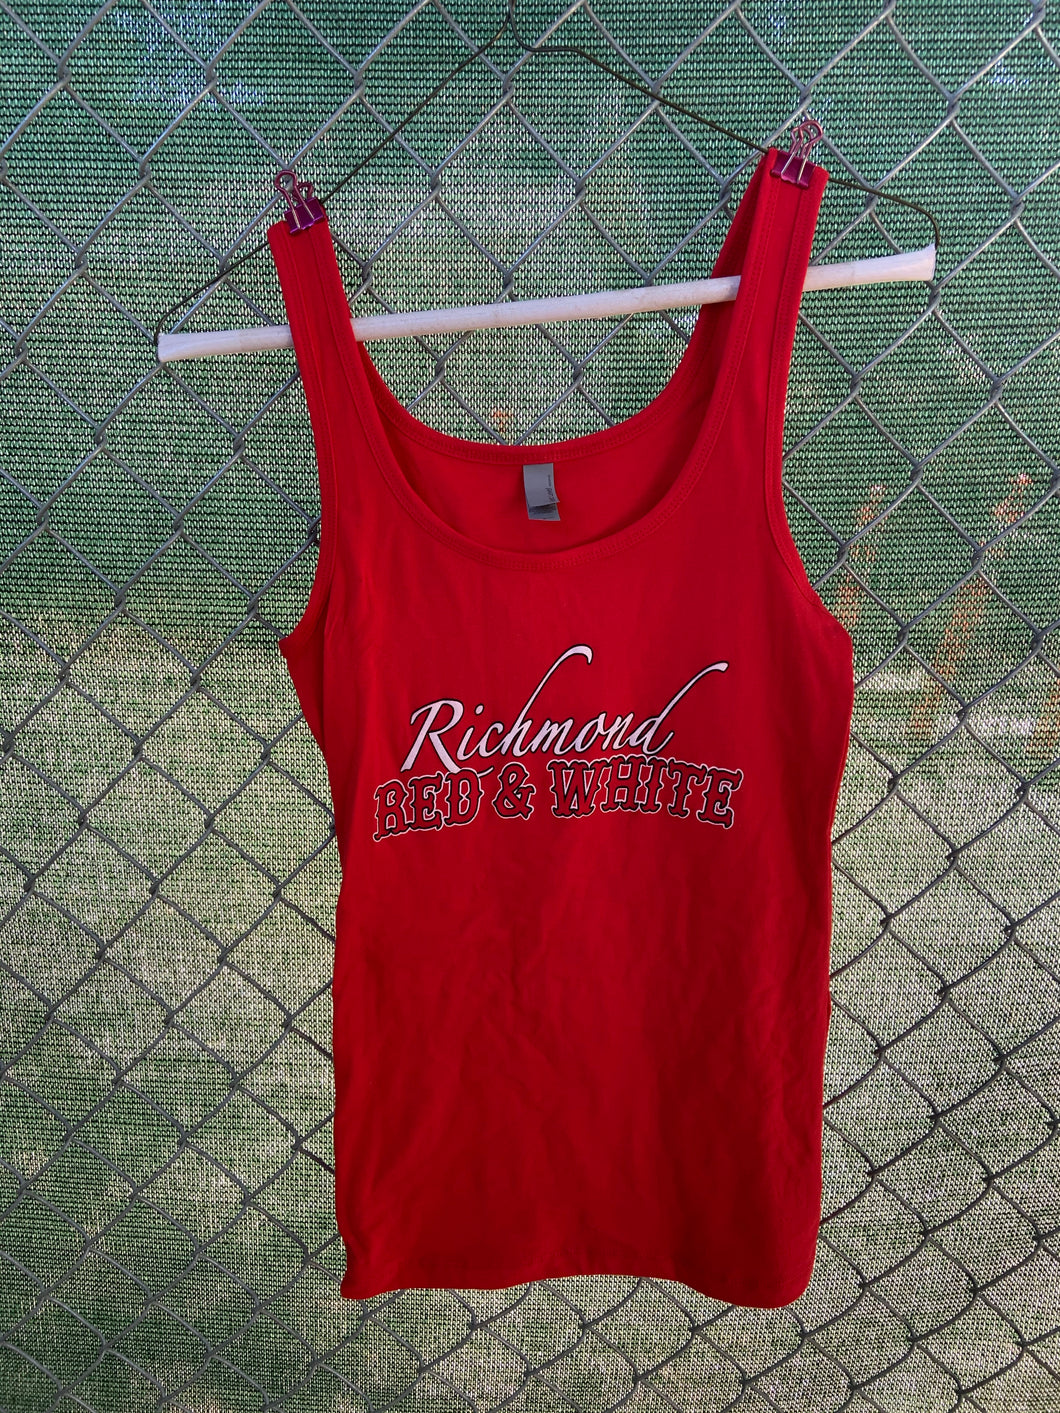 Women’s red tank top with richmond red and white on front